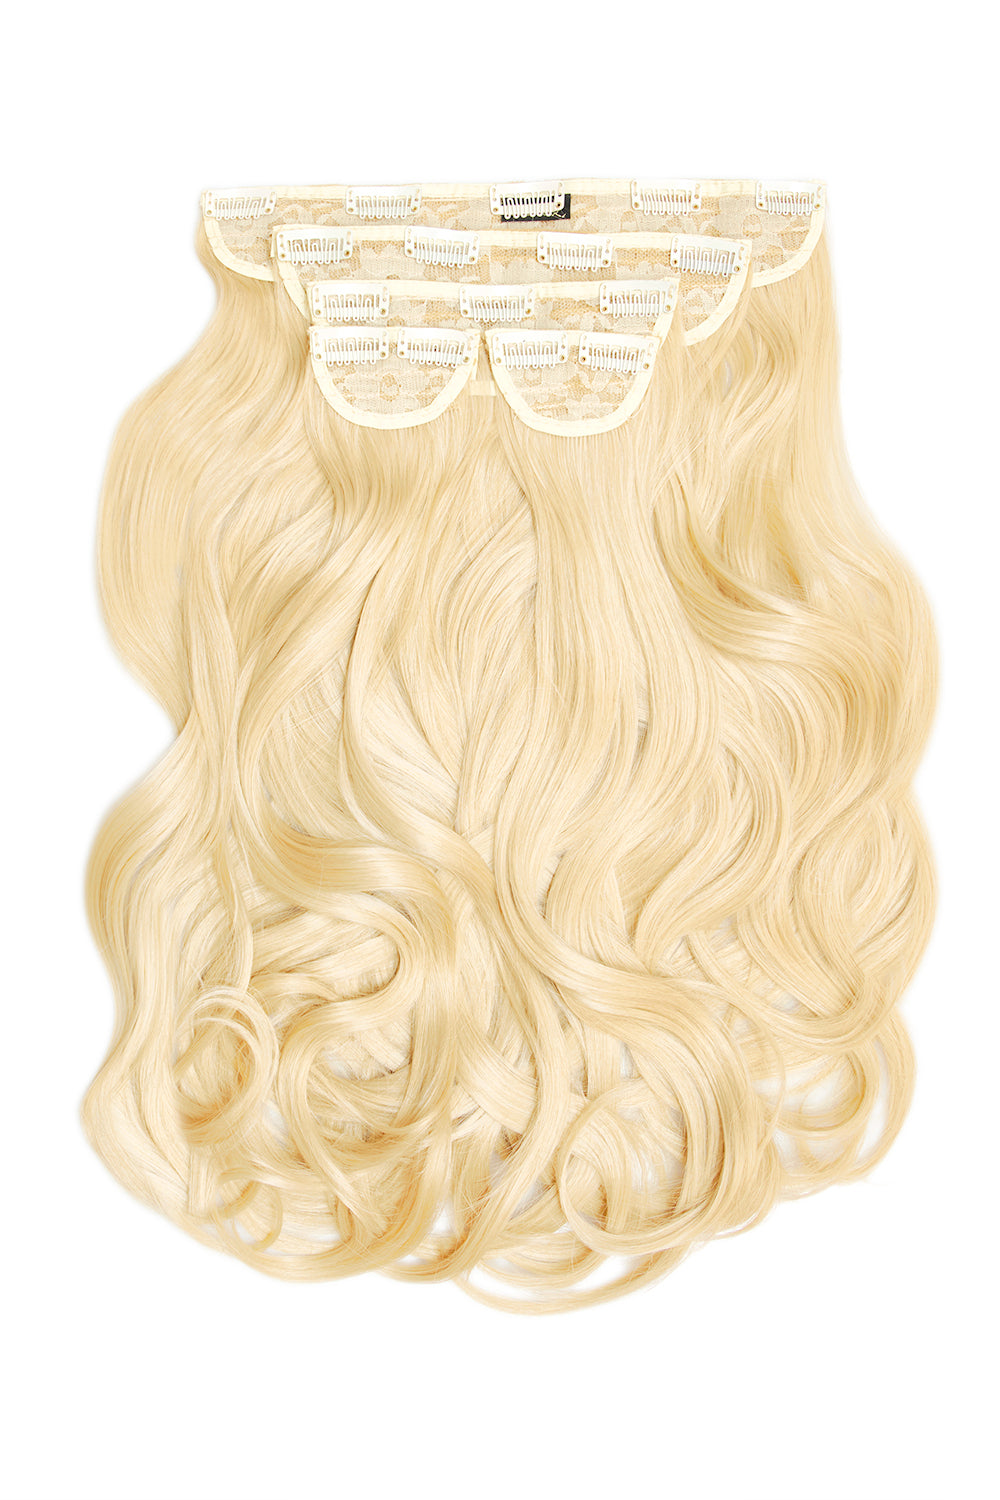 Super Thick 22" 5 Piece Blow Dry Wavy Clip In Hair Extensions - Pure Blonde